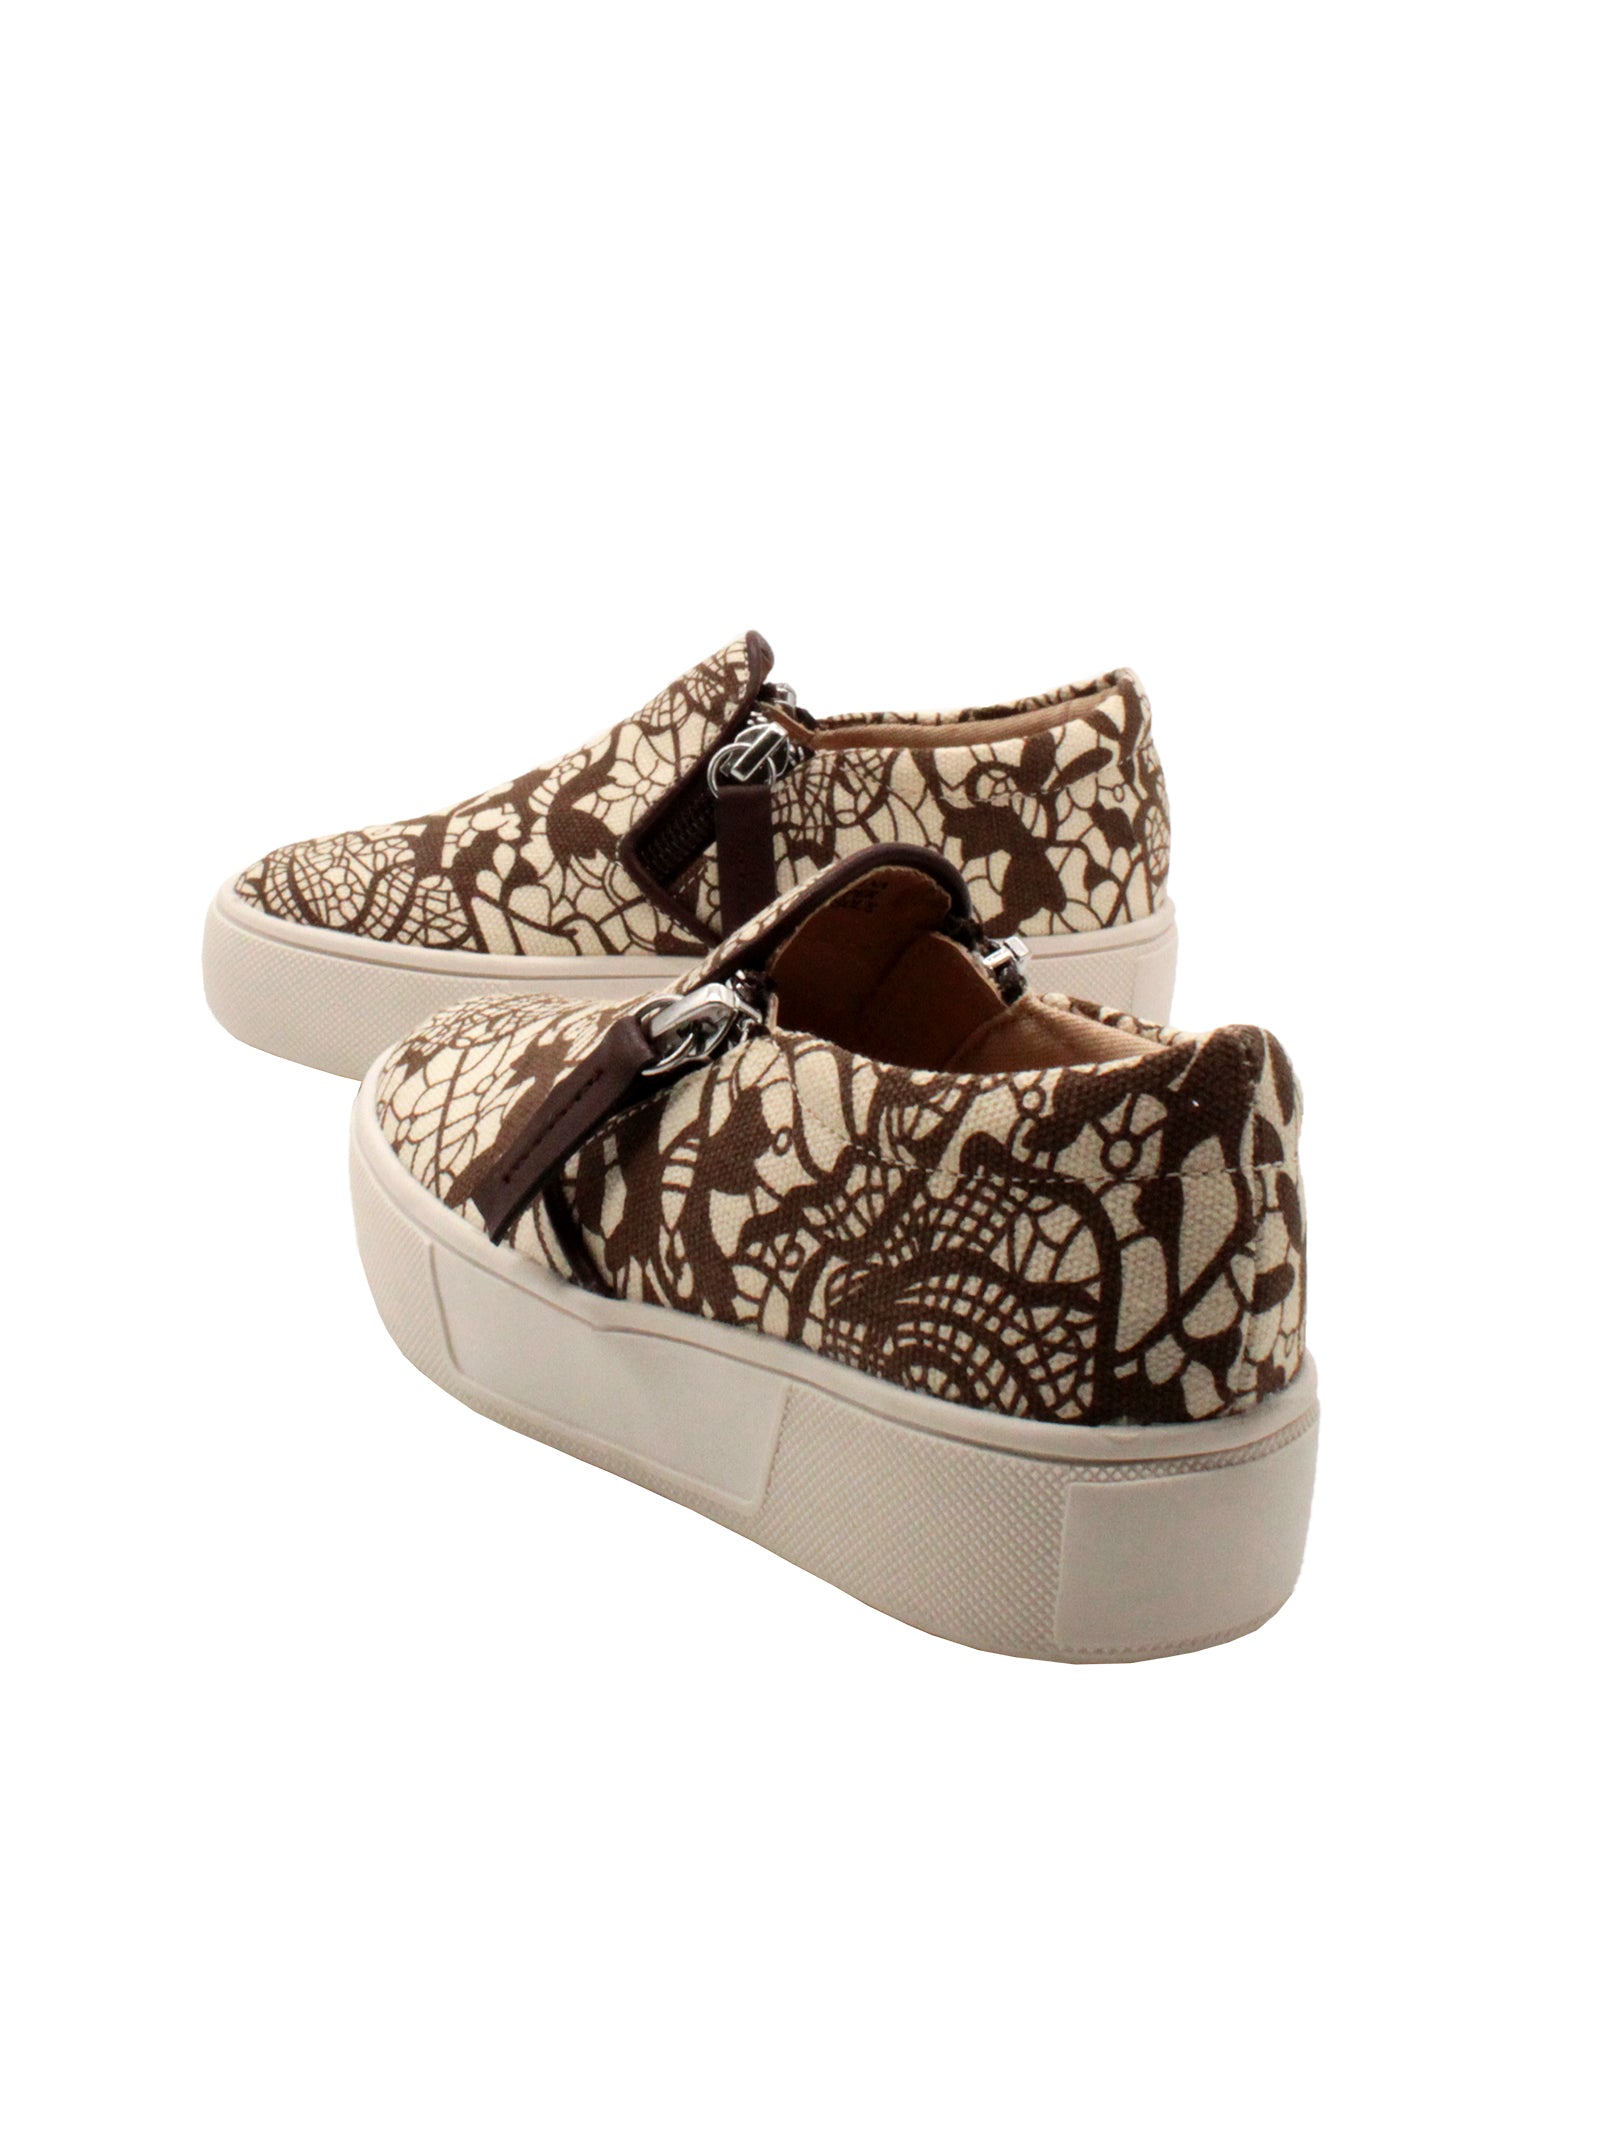 Volatile Kid’s ‘Chorus’ brown lace double zipper sneaker in printed cotton canvas is designed to easily slip on and off. They feature a cushioned sock stationed on a textured rubber sneaker bottom that’s ready for all day play. Pair them with casual outfits and dress up looks alike. back